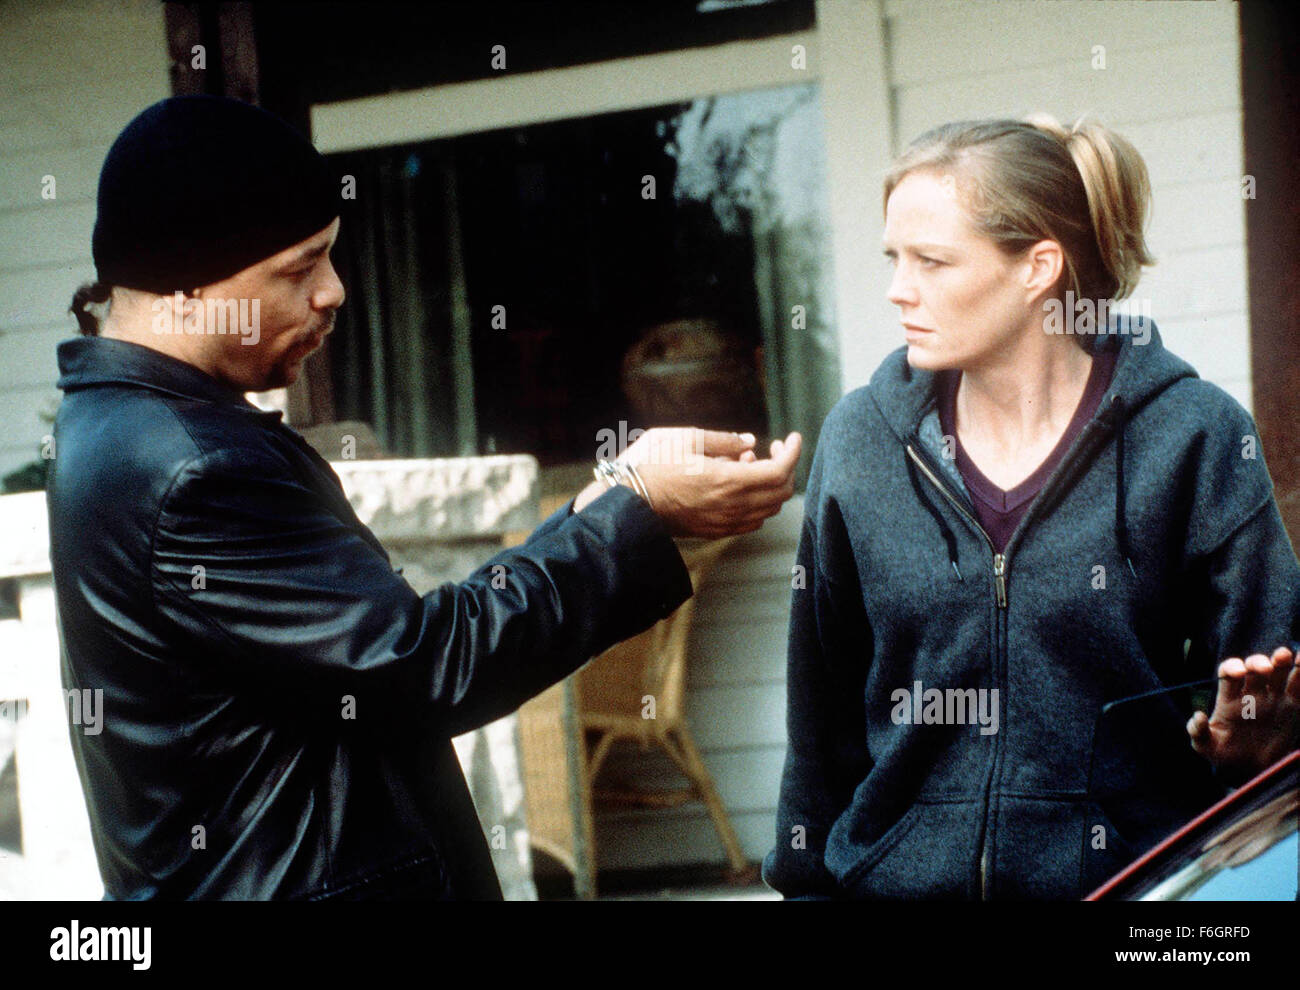 Jun 22, 2000; Los Angeles, CA, USA; ICE T and SUZY AMIS star as Matthew Reese and Janine Tyrell  in the thrilling sci-fi action film 'Judgment Day' directed by John Terlesky. Stock Photo